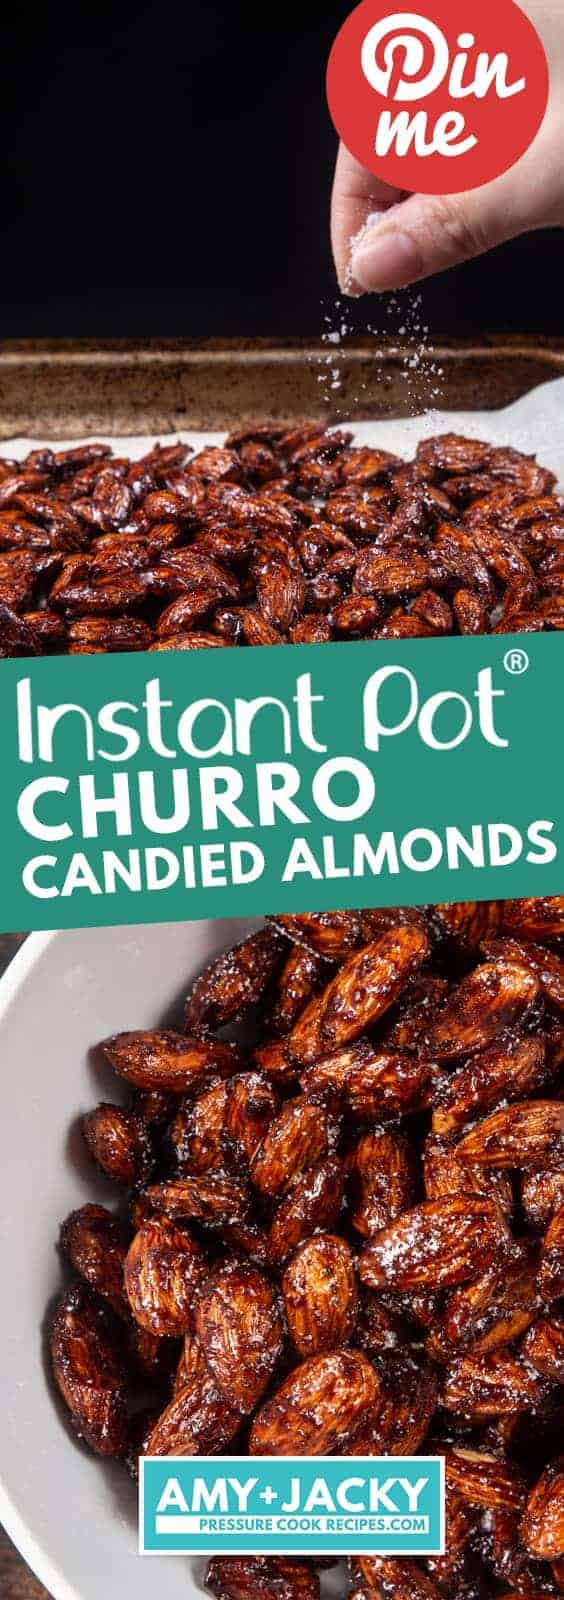 Instant Pot Churro Candied Almonds | Cinnamon Almonds | Caramelized Almonds | Spicy Candied Almonds | Candied Nuts | Christmas Food Gifts | Homemade Christmas Gifts | Edible Gifts #instantpot #slowcooker #foodgifts #christmas #gifts #recipe #nuts